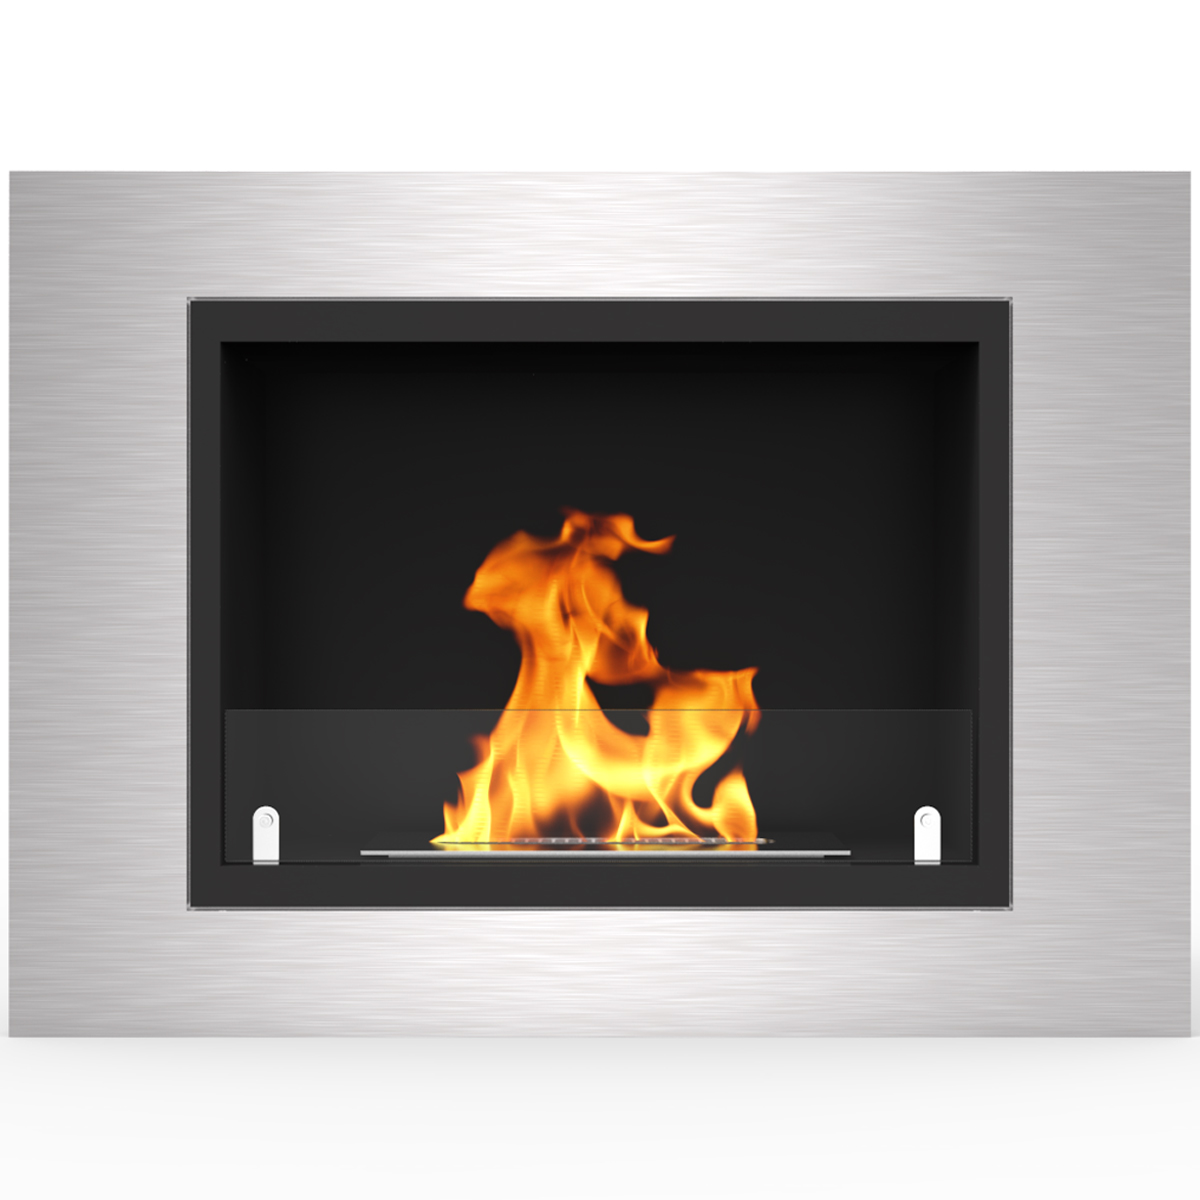 Regal Flame ER8018 Venice 32 in. Ventless Built-In Recessed Bio Ethanol Wall Mounted Fireplace